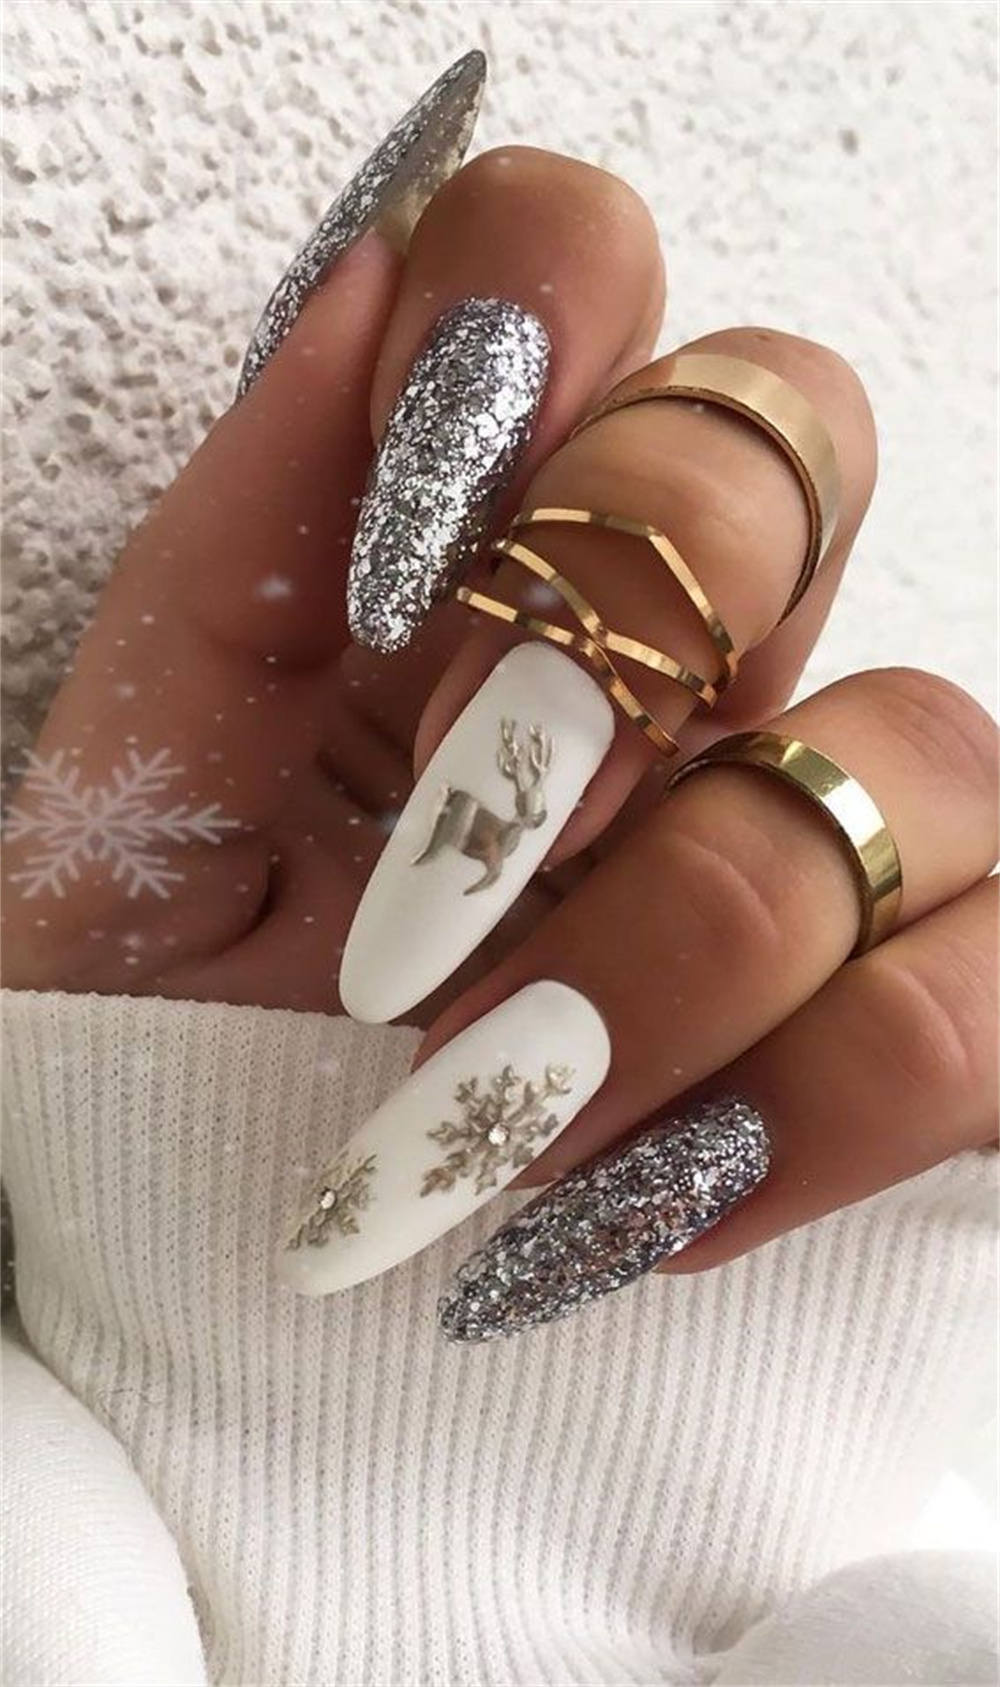 Christmas nails with sparkling silver snowflake designs